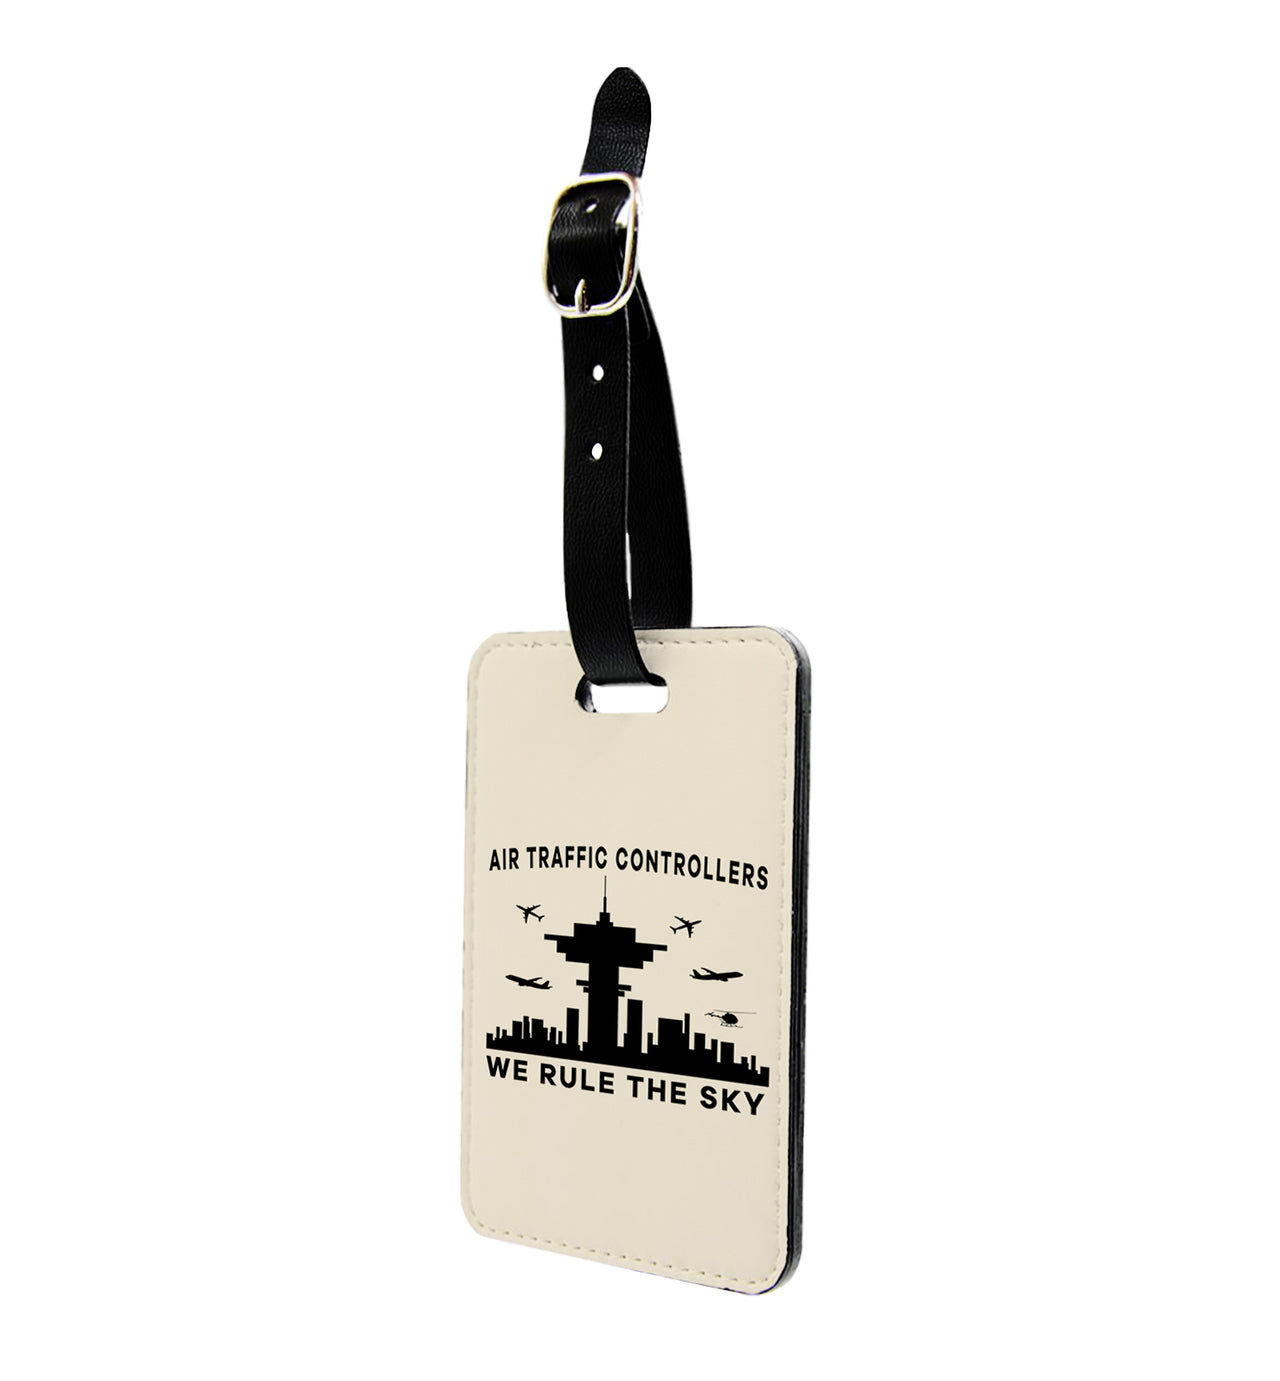 Air Traffic Controllers - We Rule The Sky Designed Luggage Tag